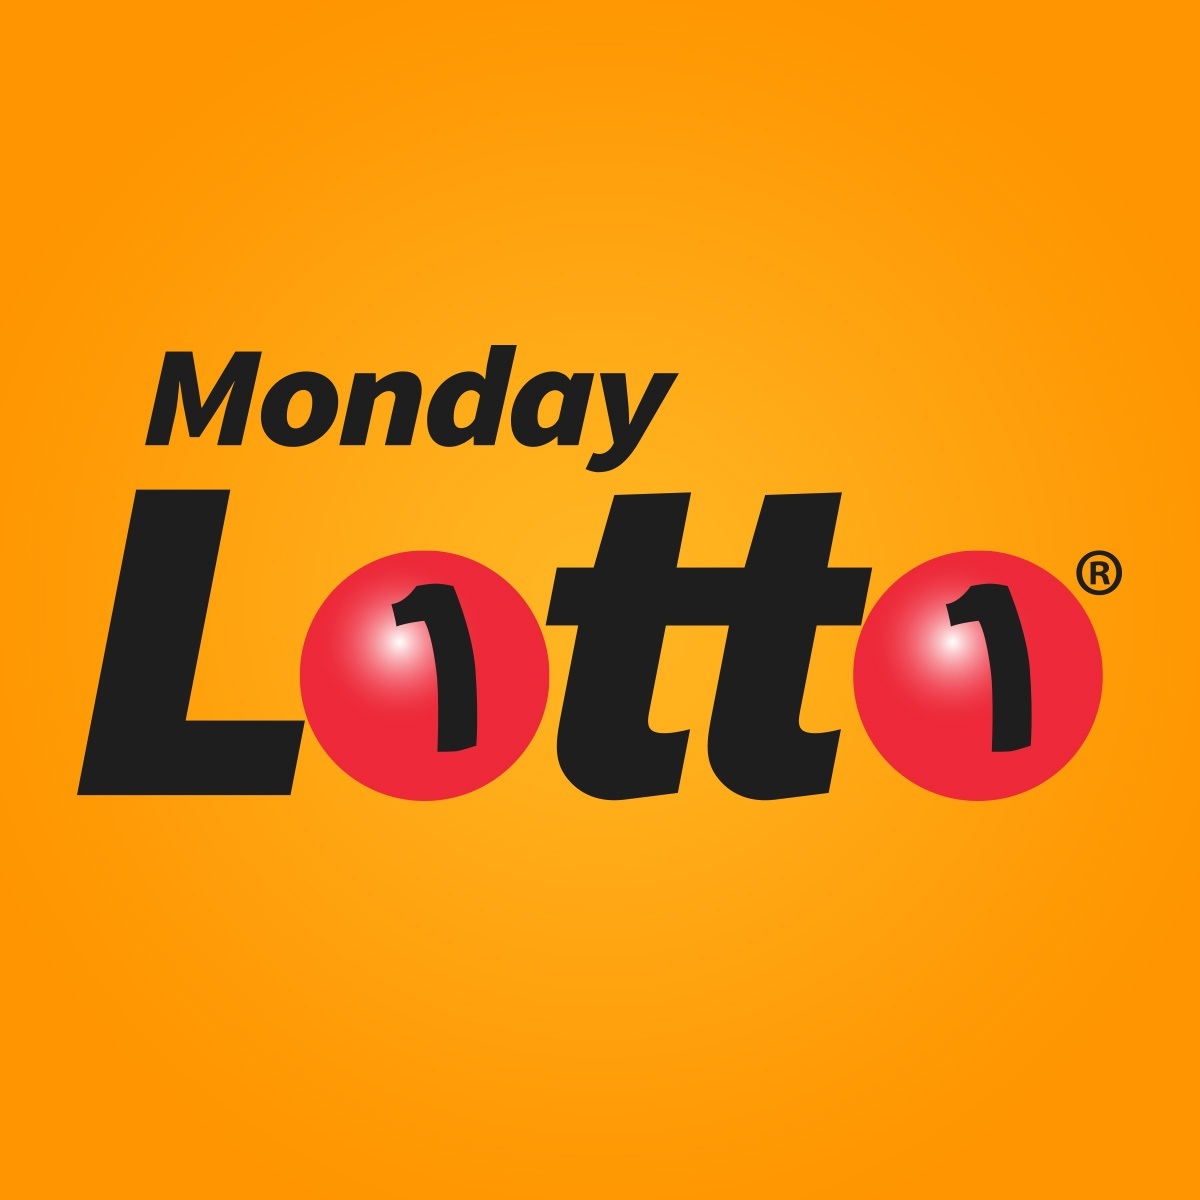 monday lotto results time